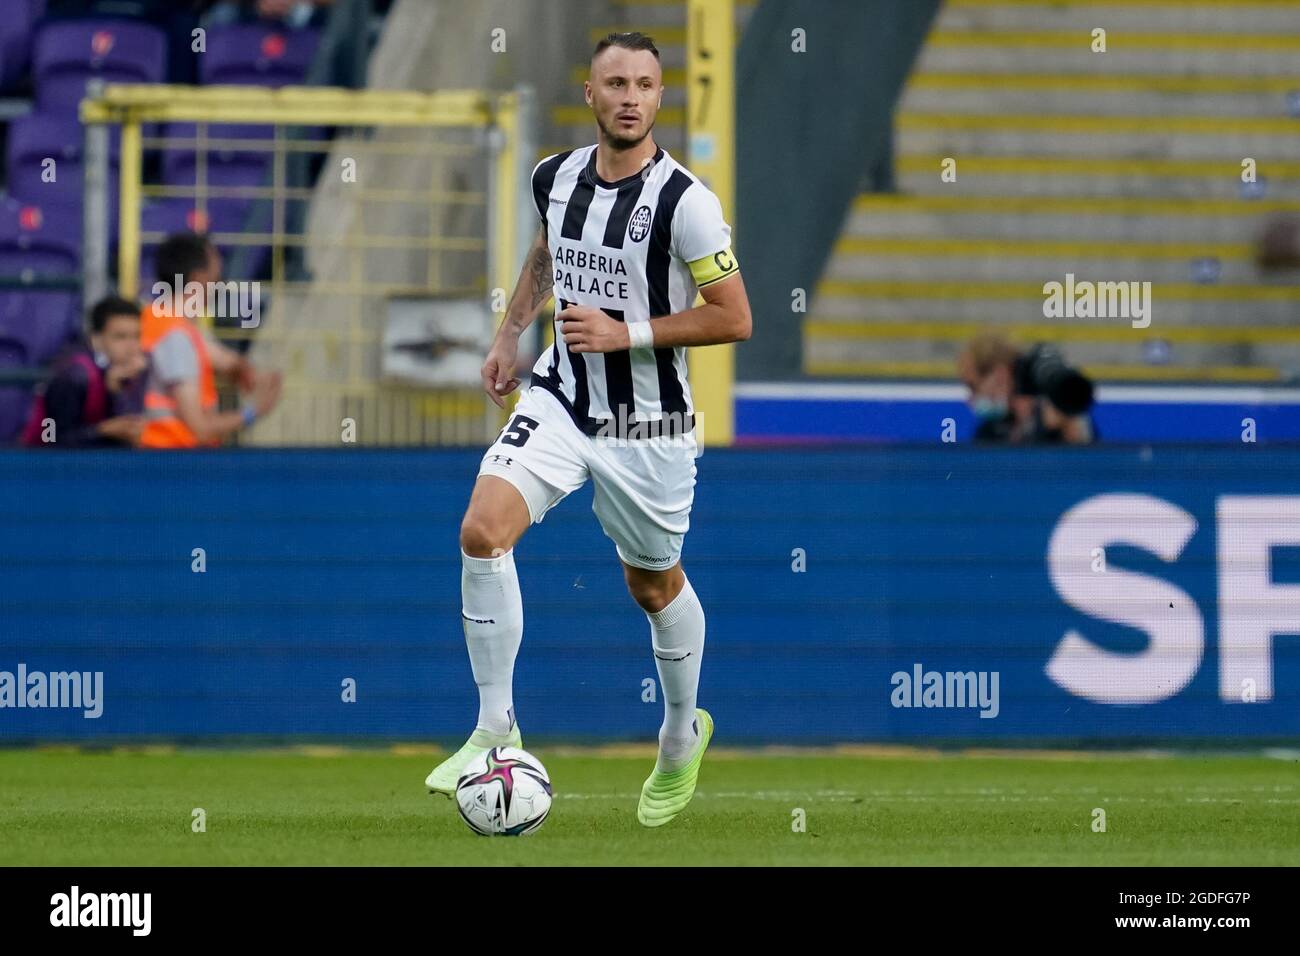 Brussels, Belgium. 12th Aug, 2021. BRUSSELS, BELGIUM - AUGUST 12:  Aleksandar Ignjatovic of KF Laci during the UEFA Europa Conference League  Qualification match between RSC Anderlecht and KF Laci at Lotto Park